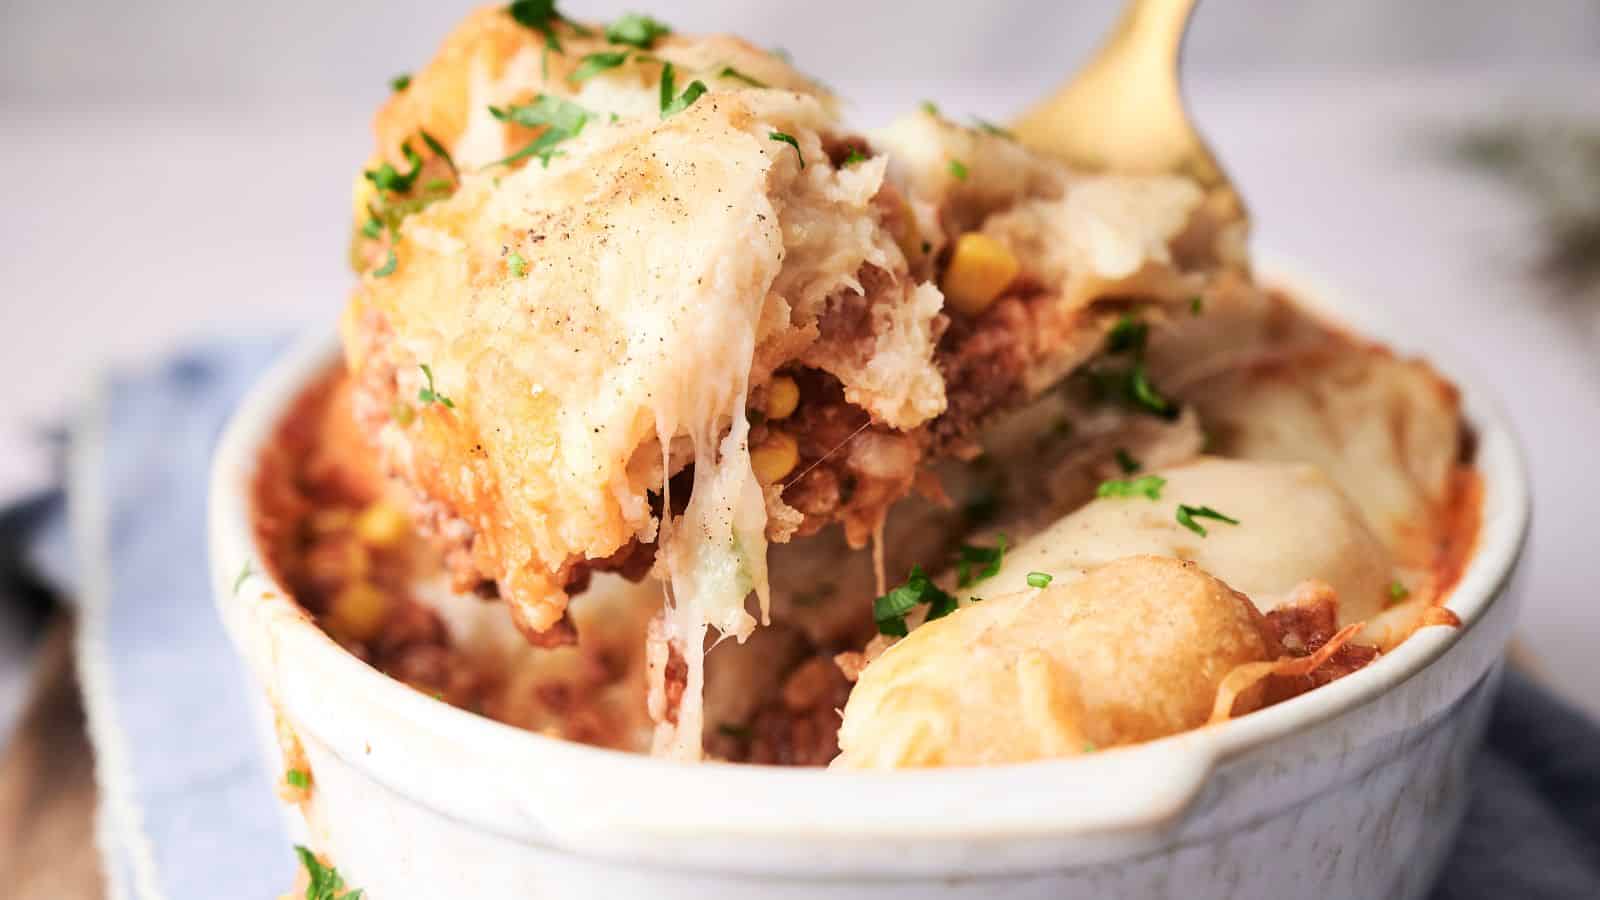 Discover The 15 Casserole Recipes Everyone's Raving About! - Easy ...